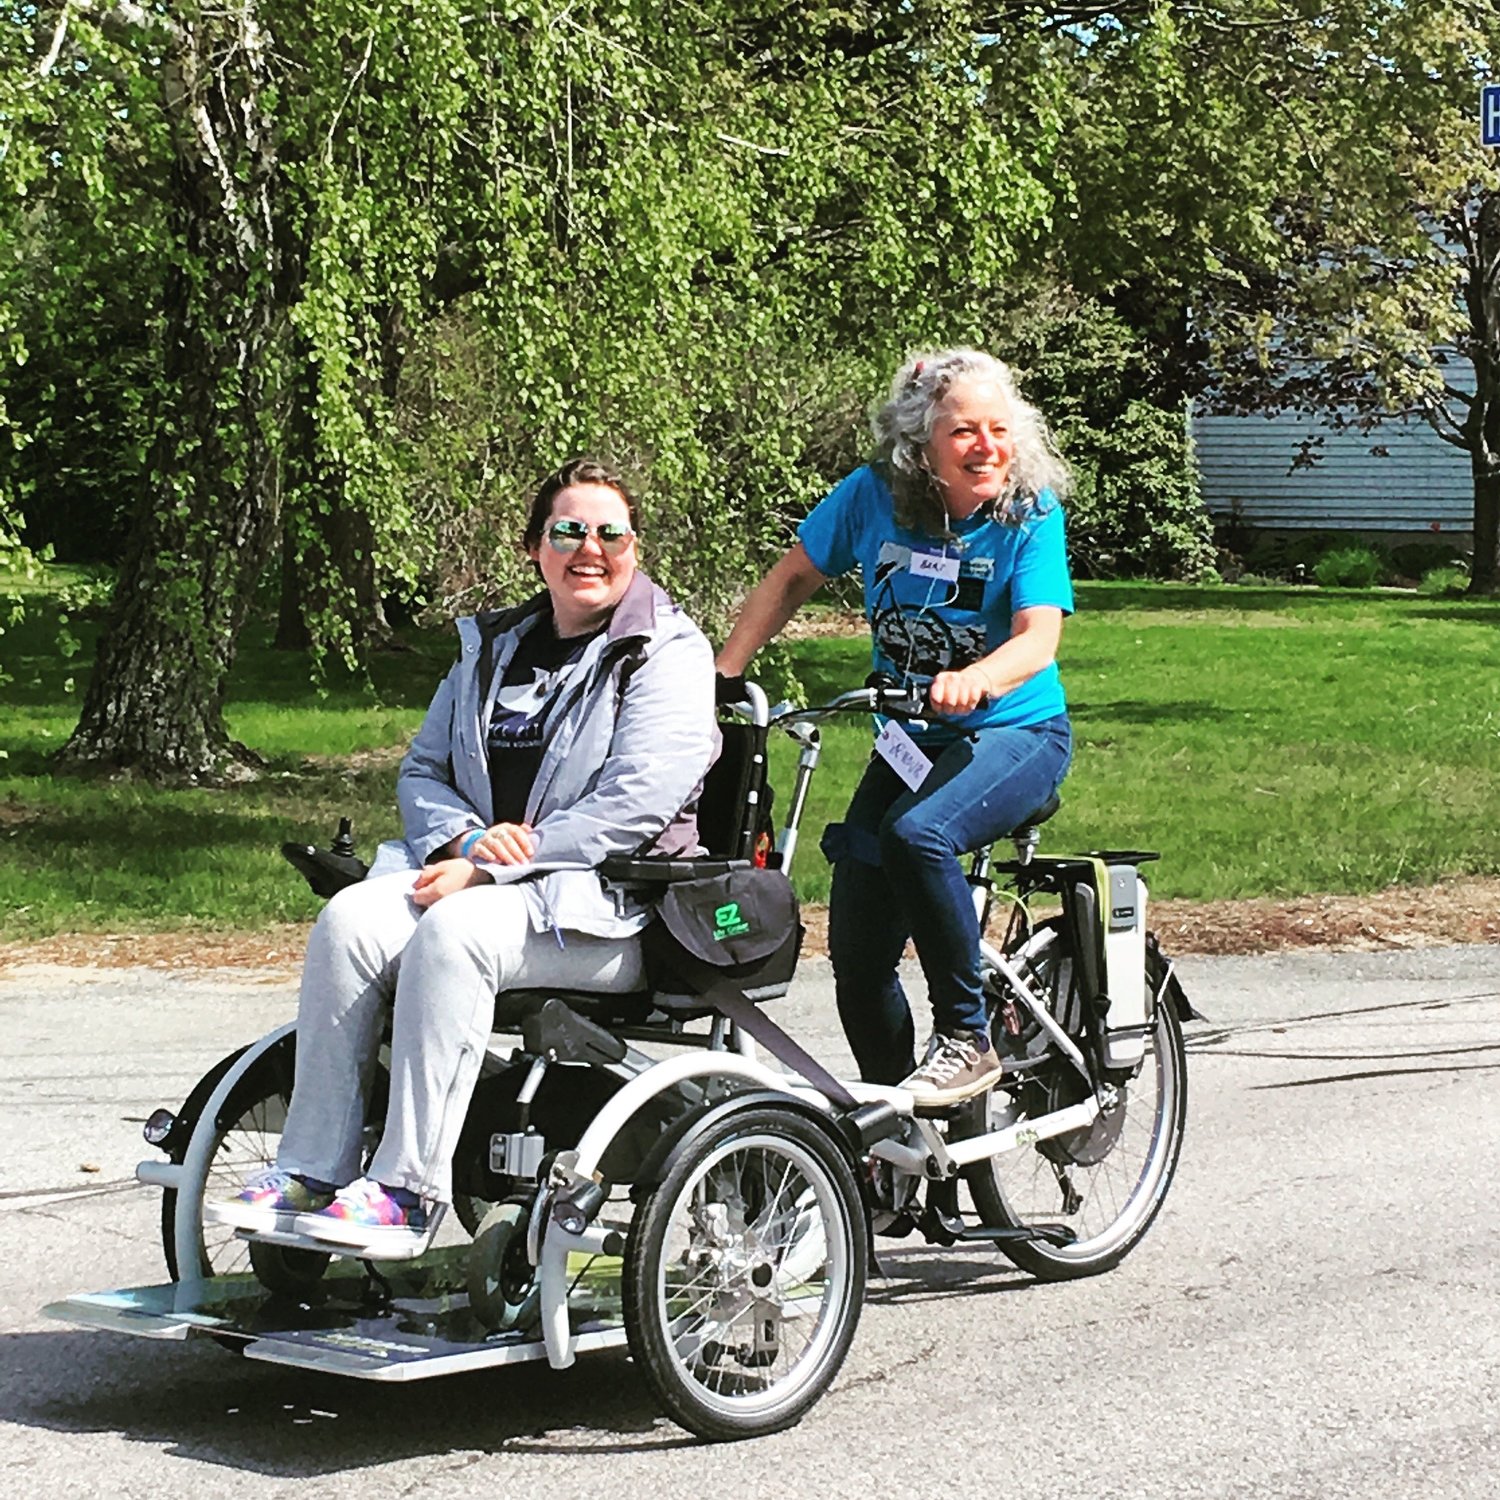 Bari and Tory on the Velo Plus during the 2019 Farm to Farm Ride in Portsmouth.